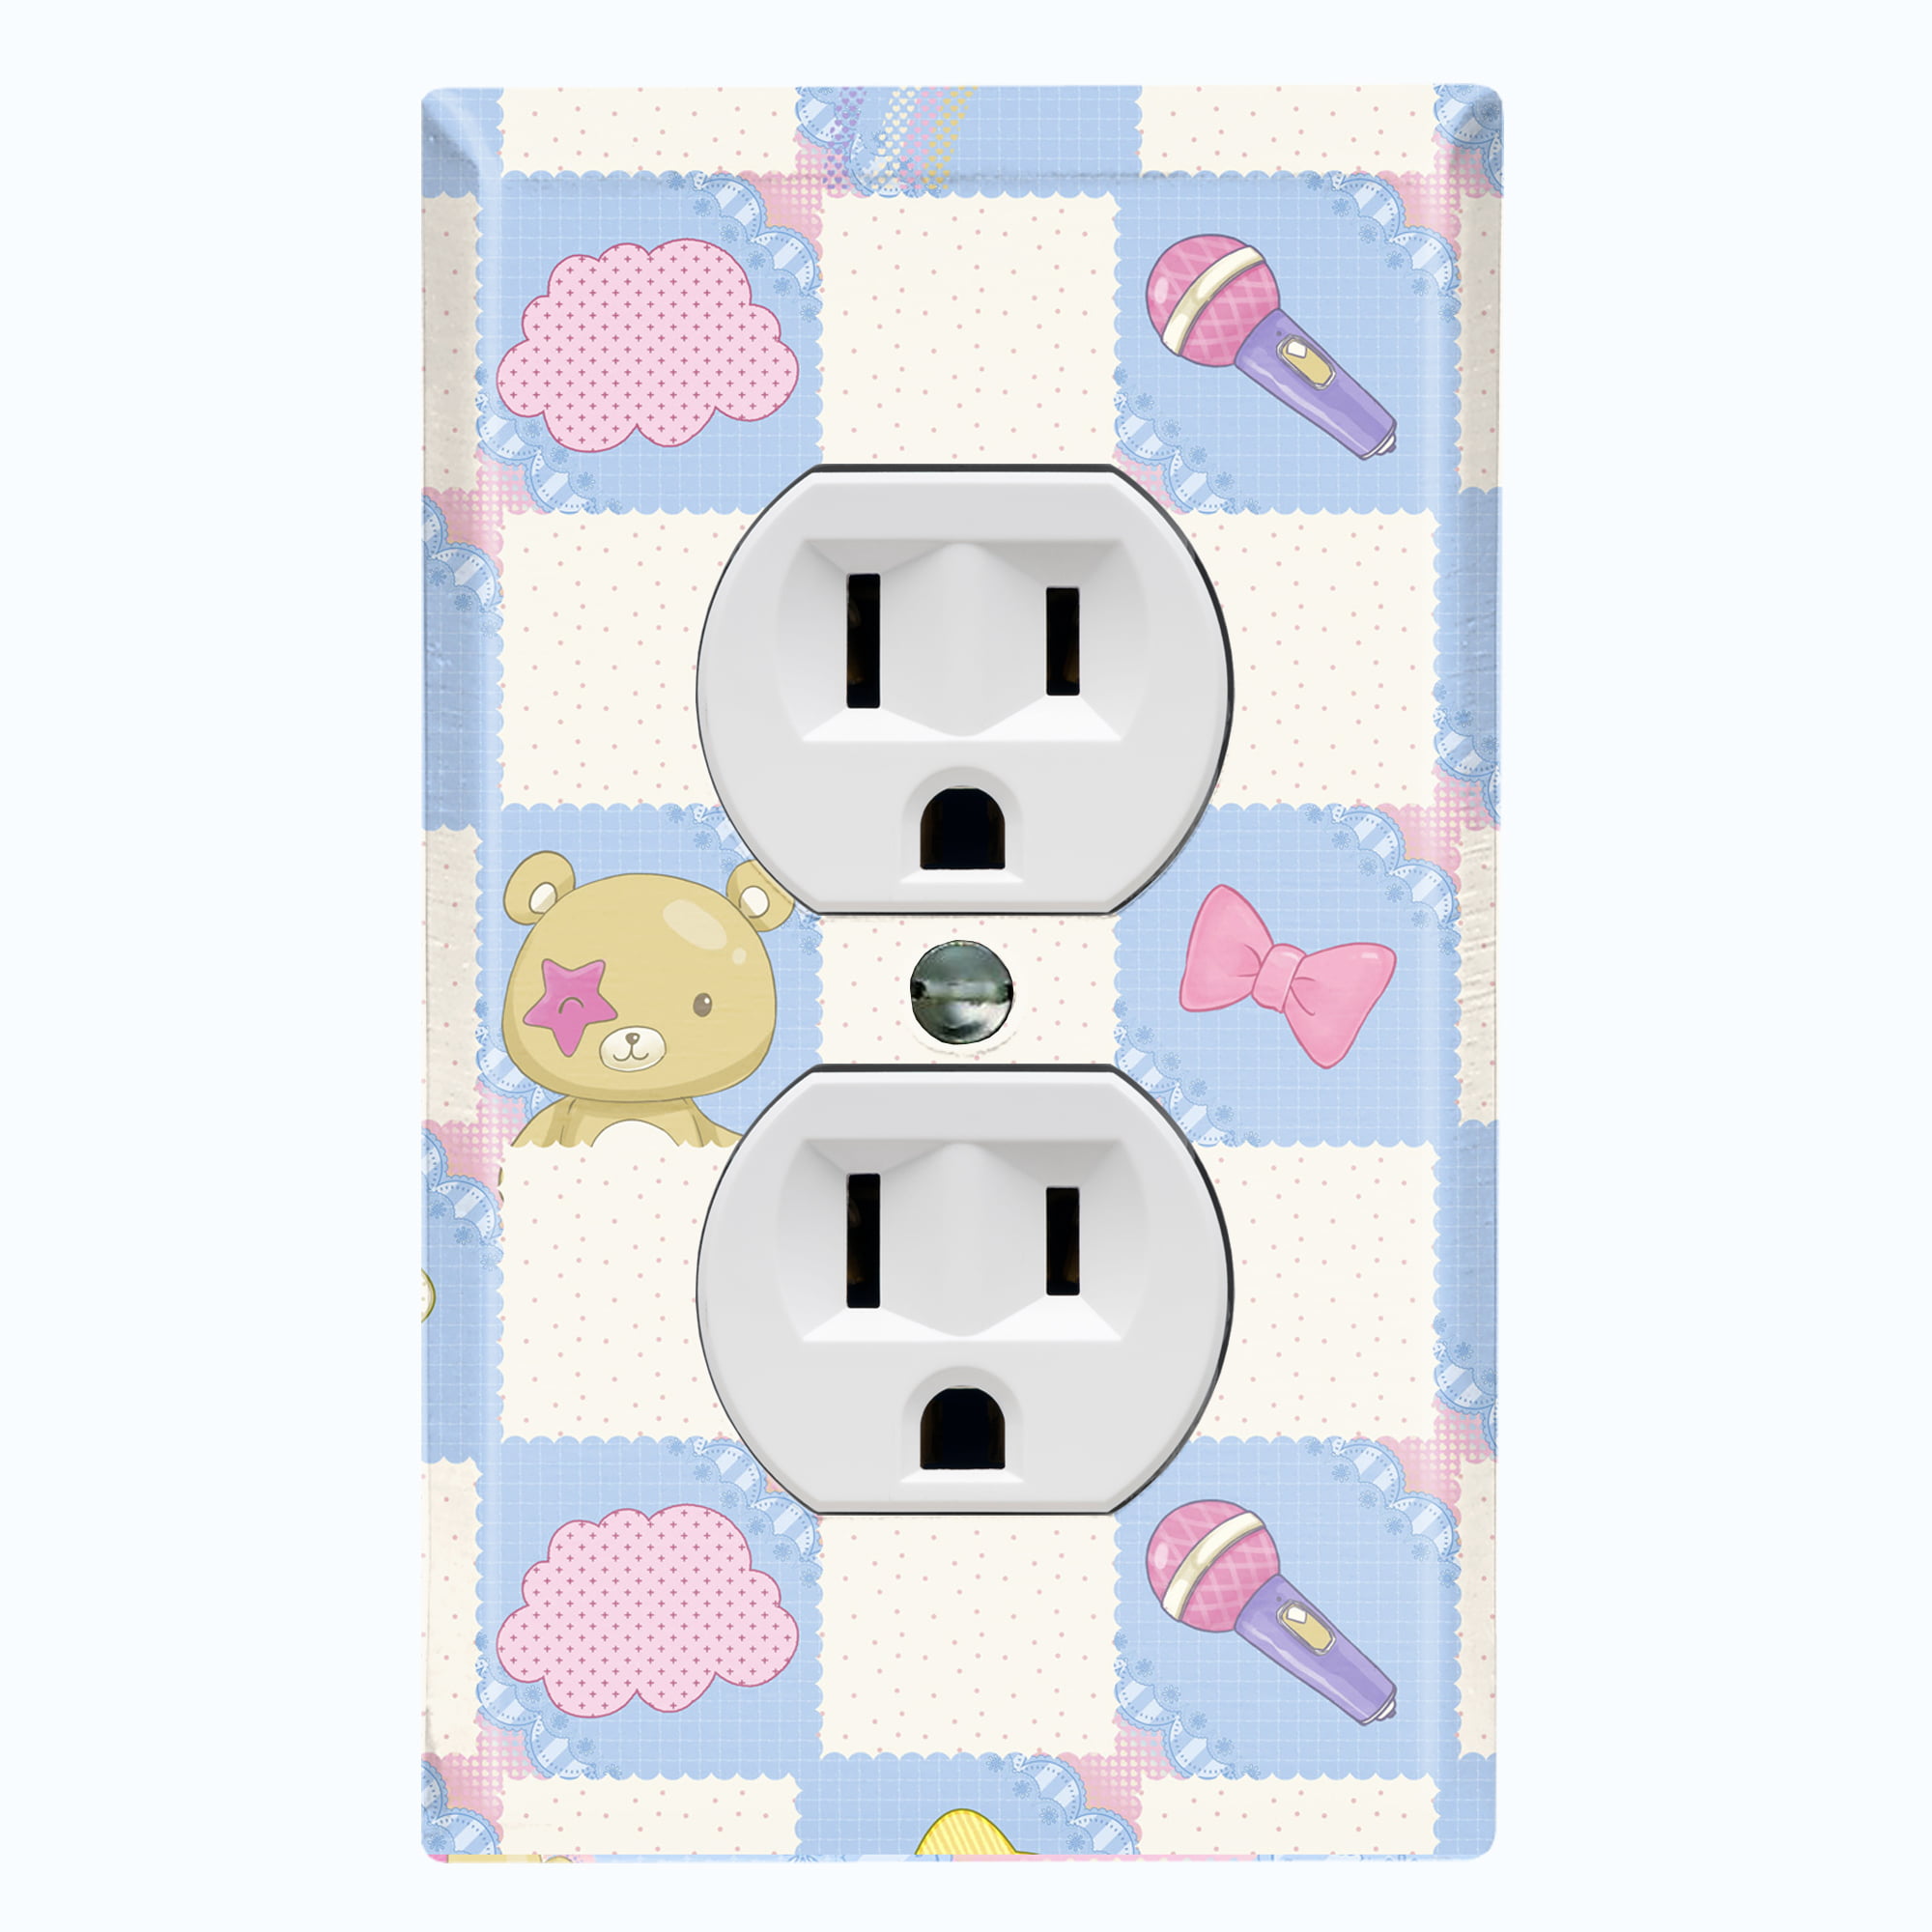 1-Gang Device Receptacle Wallplate Single Outlet Wall Plate/Panel Plate/Cover Light Blue Bird Hand Outline Pattern Light Panel Cover